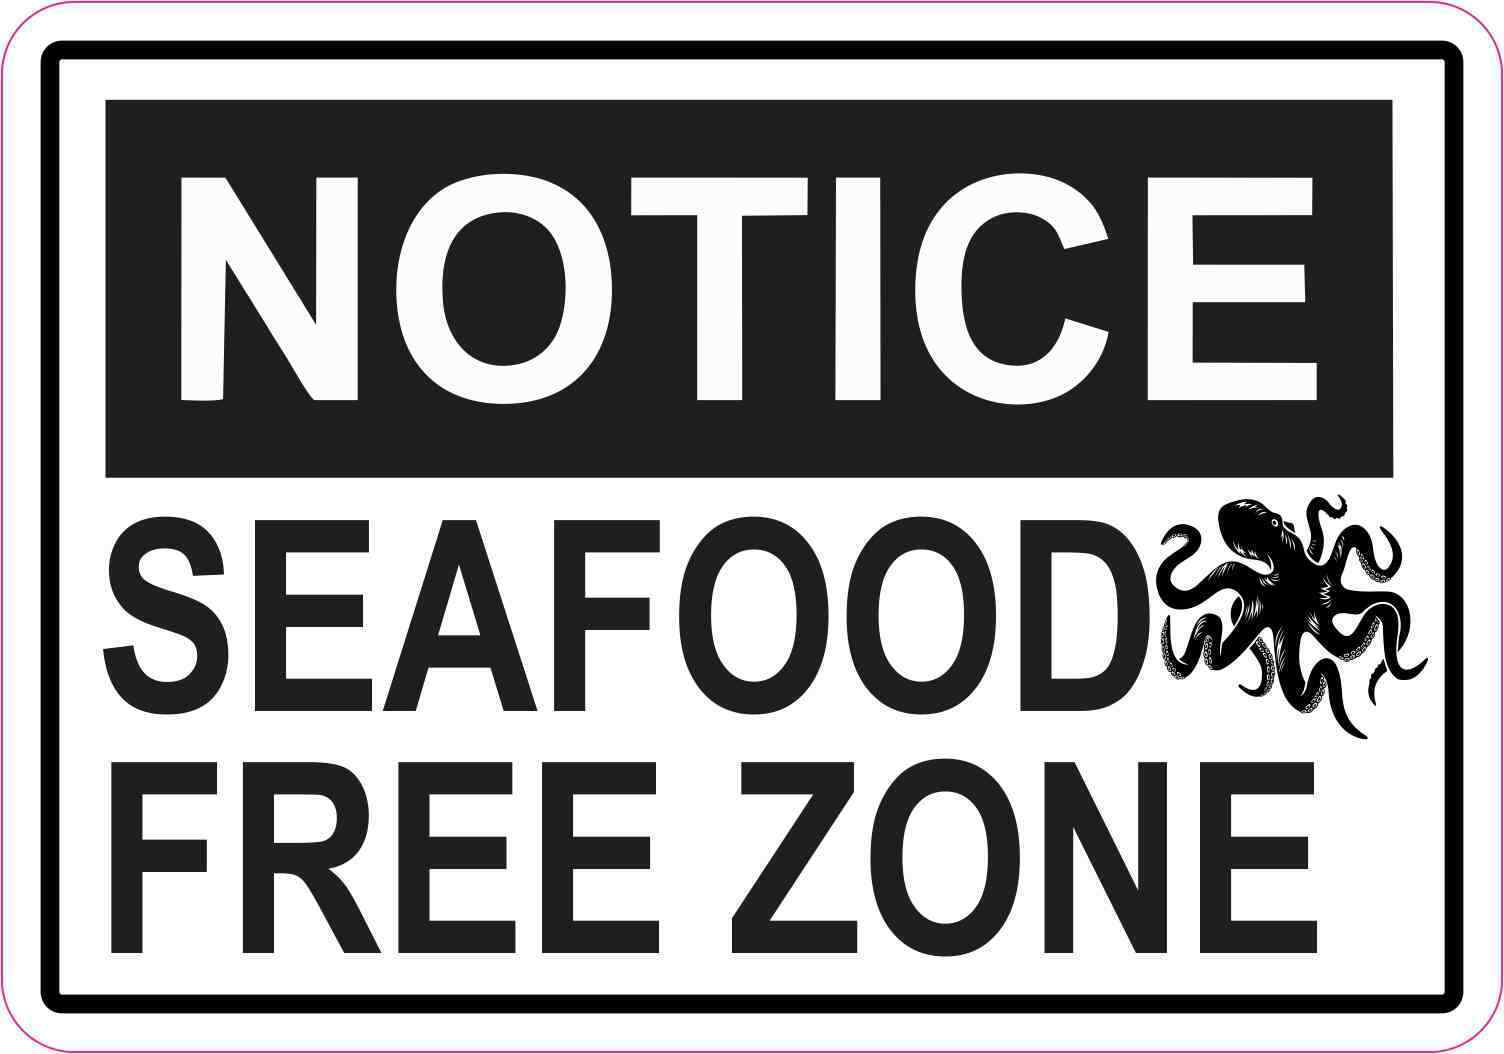 5 x 3.5 Octopus Notice Seafood Free Zone Magnet Car Truck Vehicle Magnetic Sign